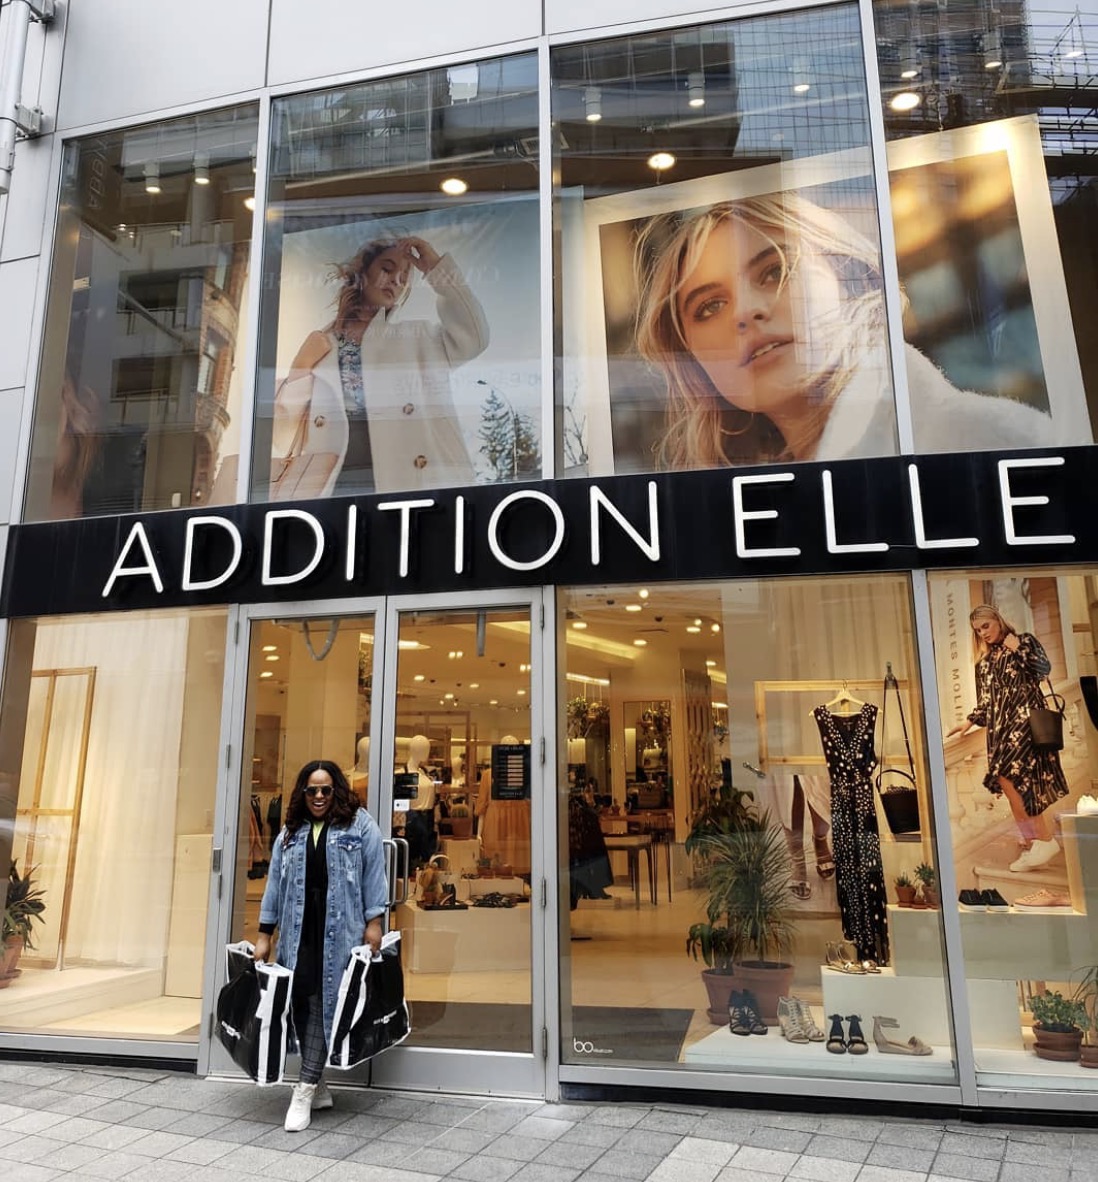 I Shopped At Addition Elle And Torrid, Which Plus-Size Store Is